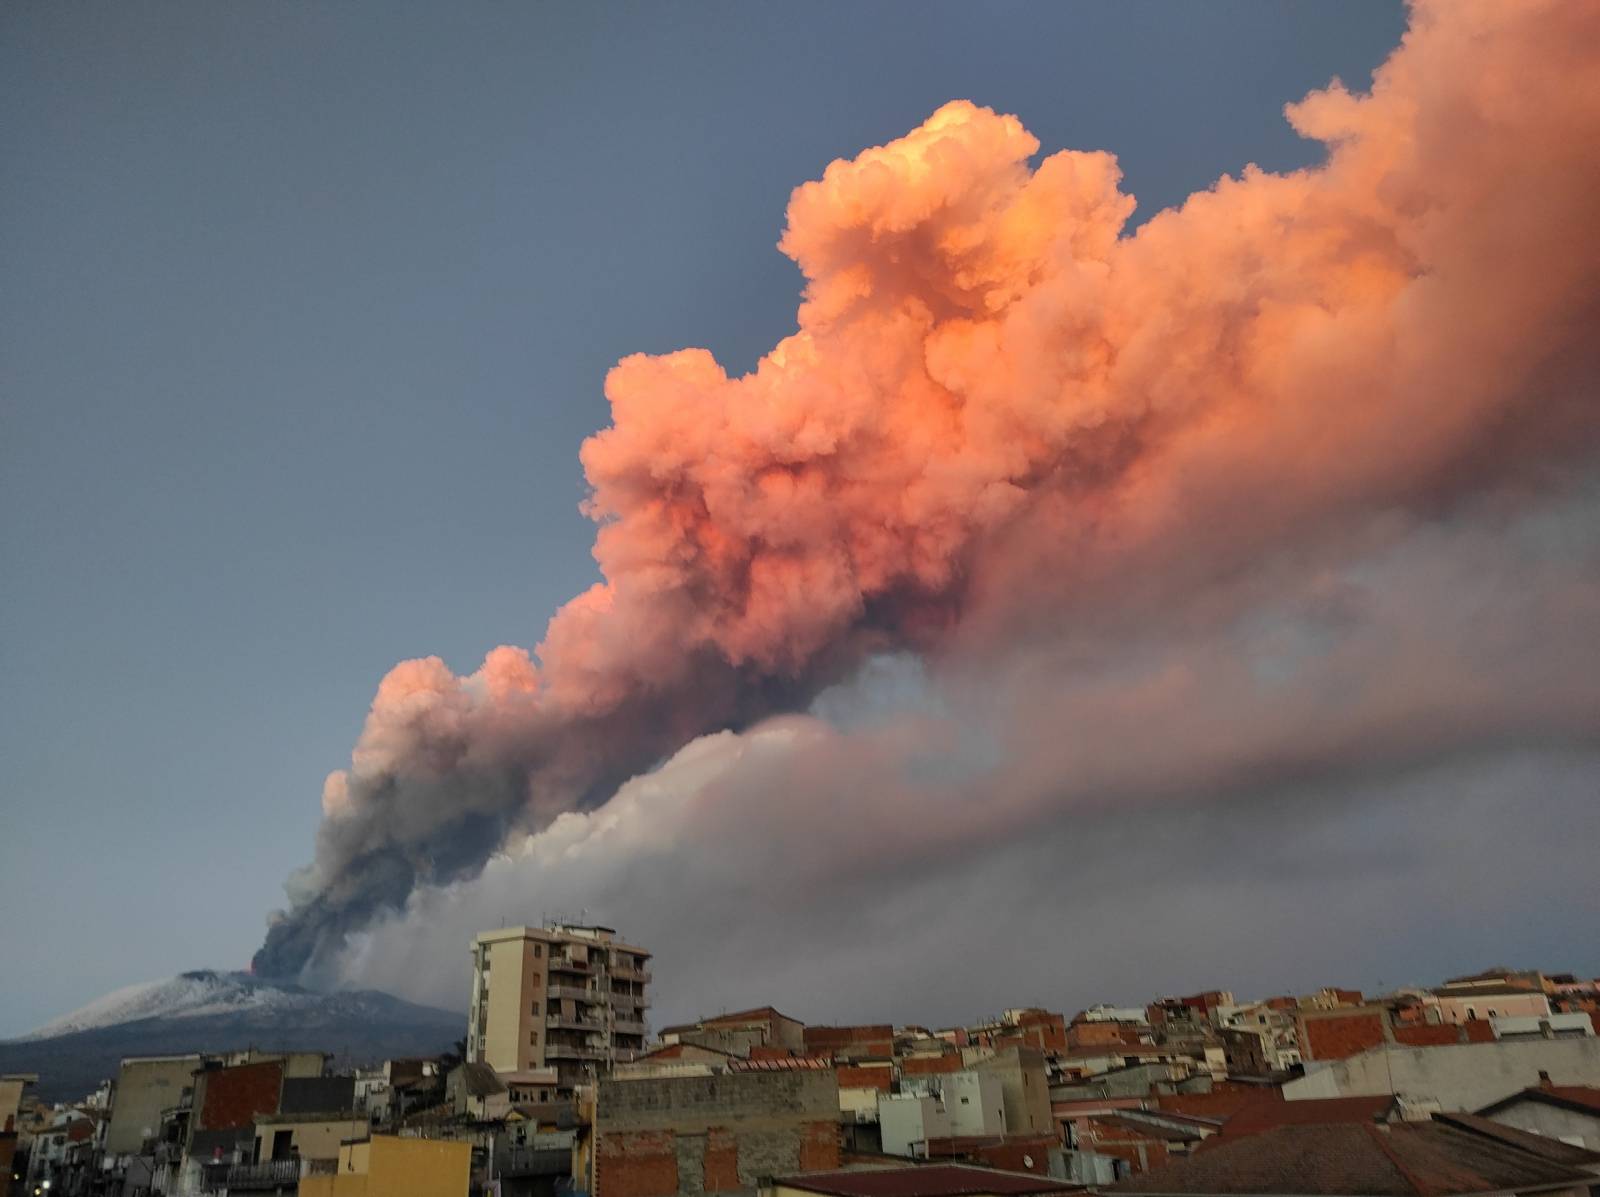 A view of the Mount Etna eruption spewing ash, as seen from Paterno, Italy, in this image obtained from social media